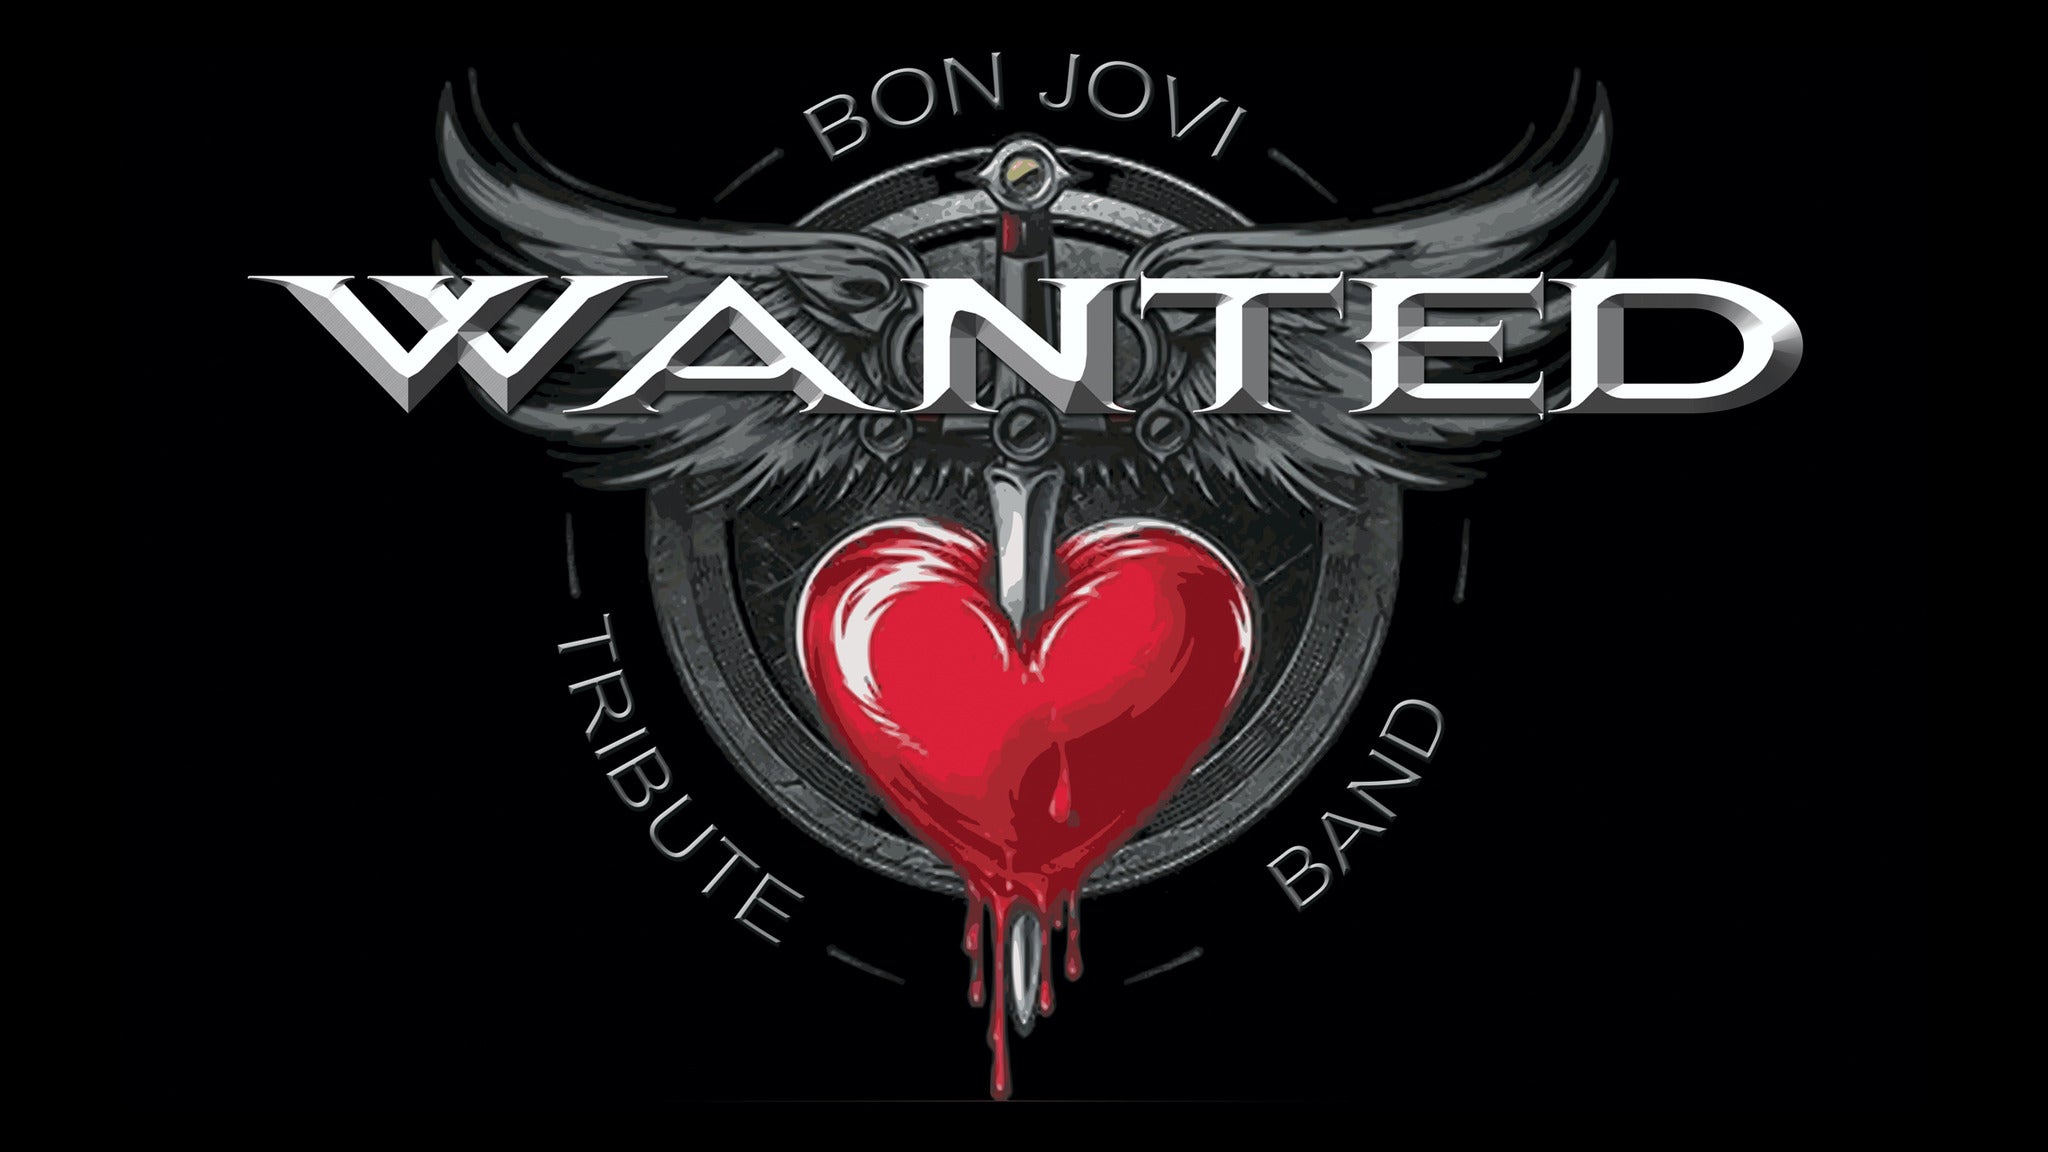 Wanted - Tribute To Bon Jovi in Cleveland promo photo for Live Nation presale offer code